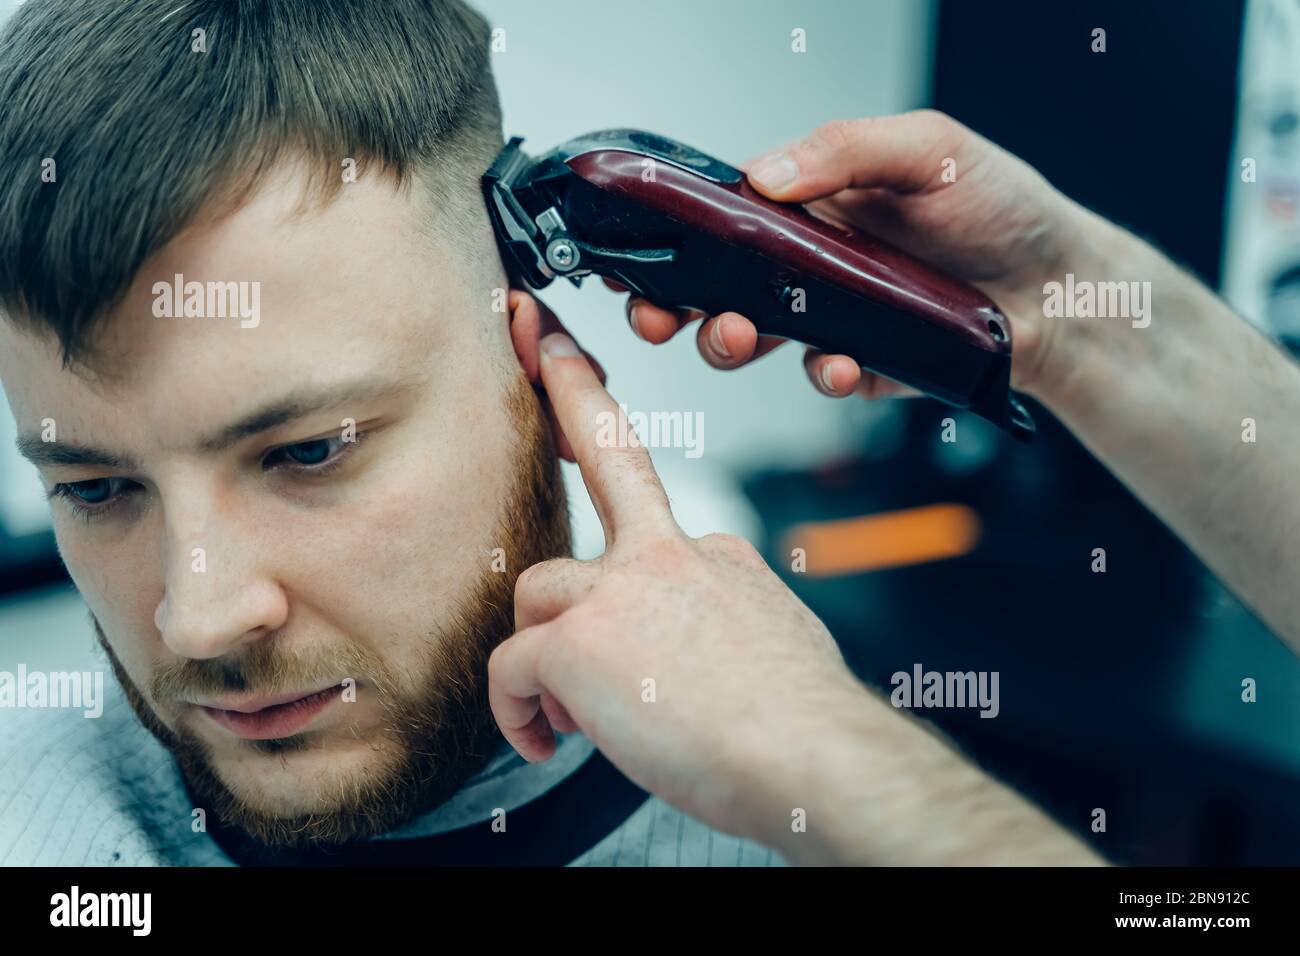 electric shaver barbers use